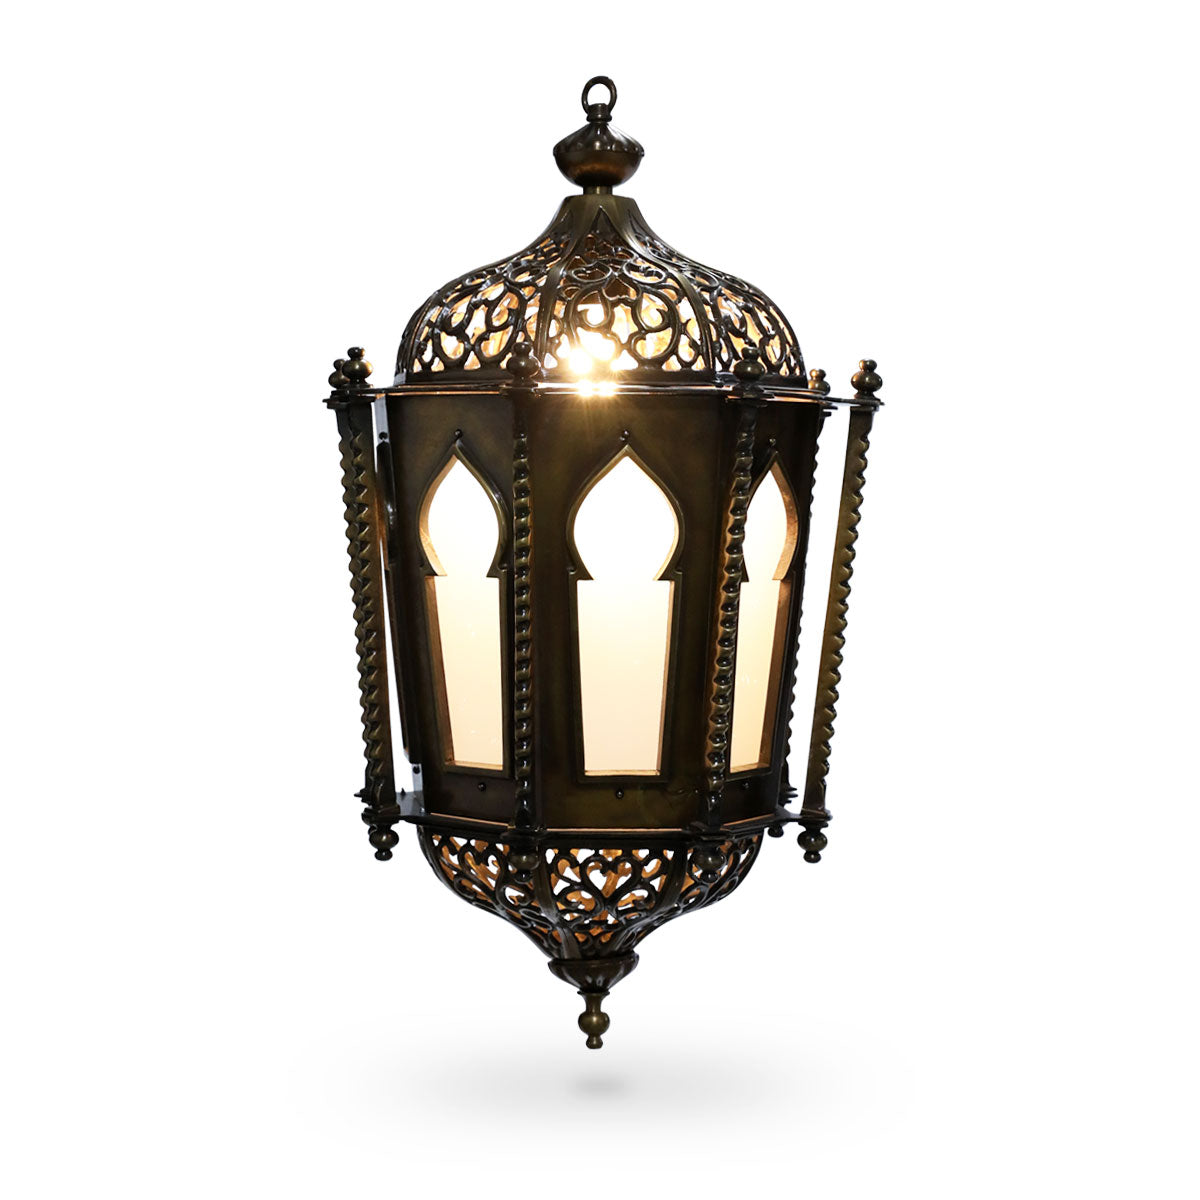 Front View of Syrian Accent Pillared Pendant Light with Bulbs On